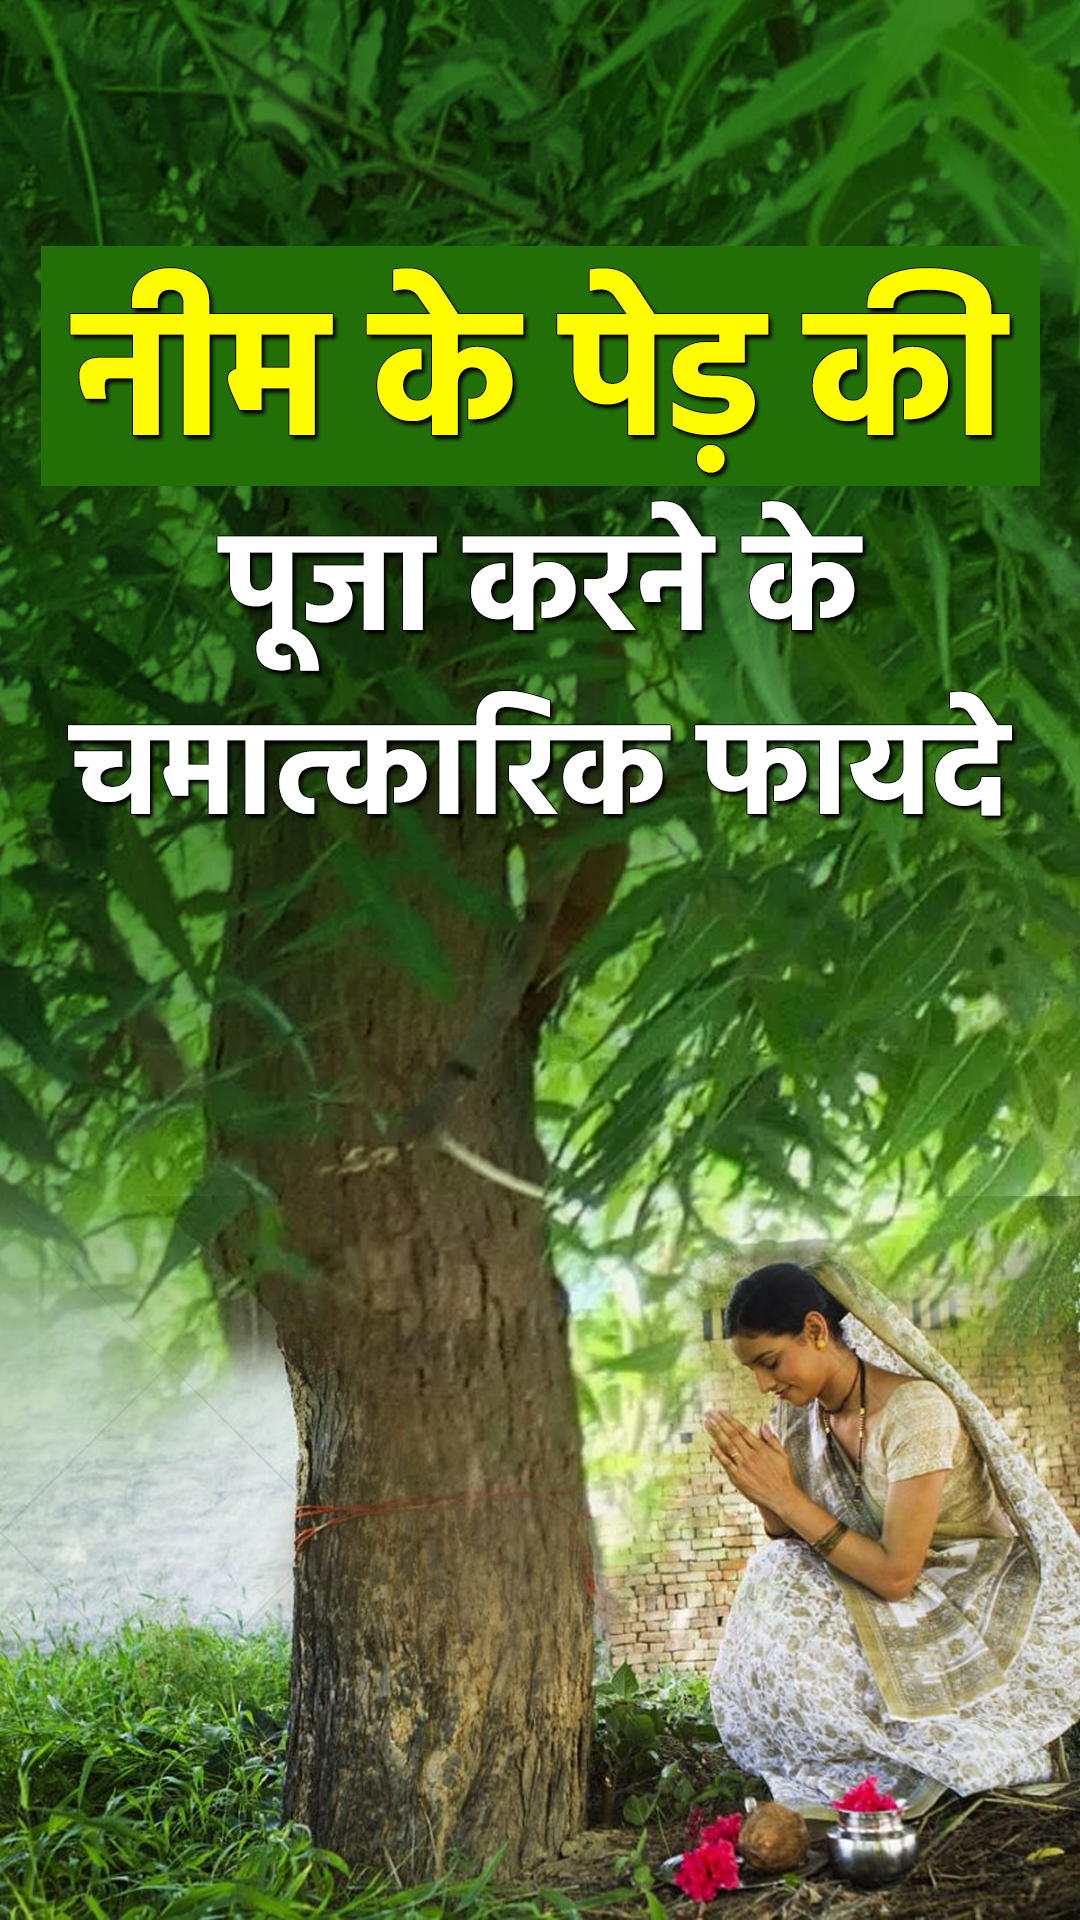 Pose Ideas with Trees and Leaves | Photoshoot Poses in Hindi Language -  YouTube